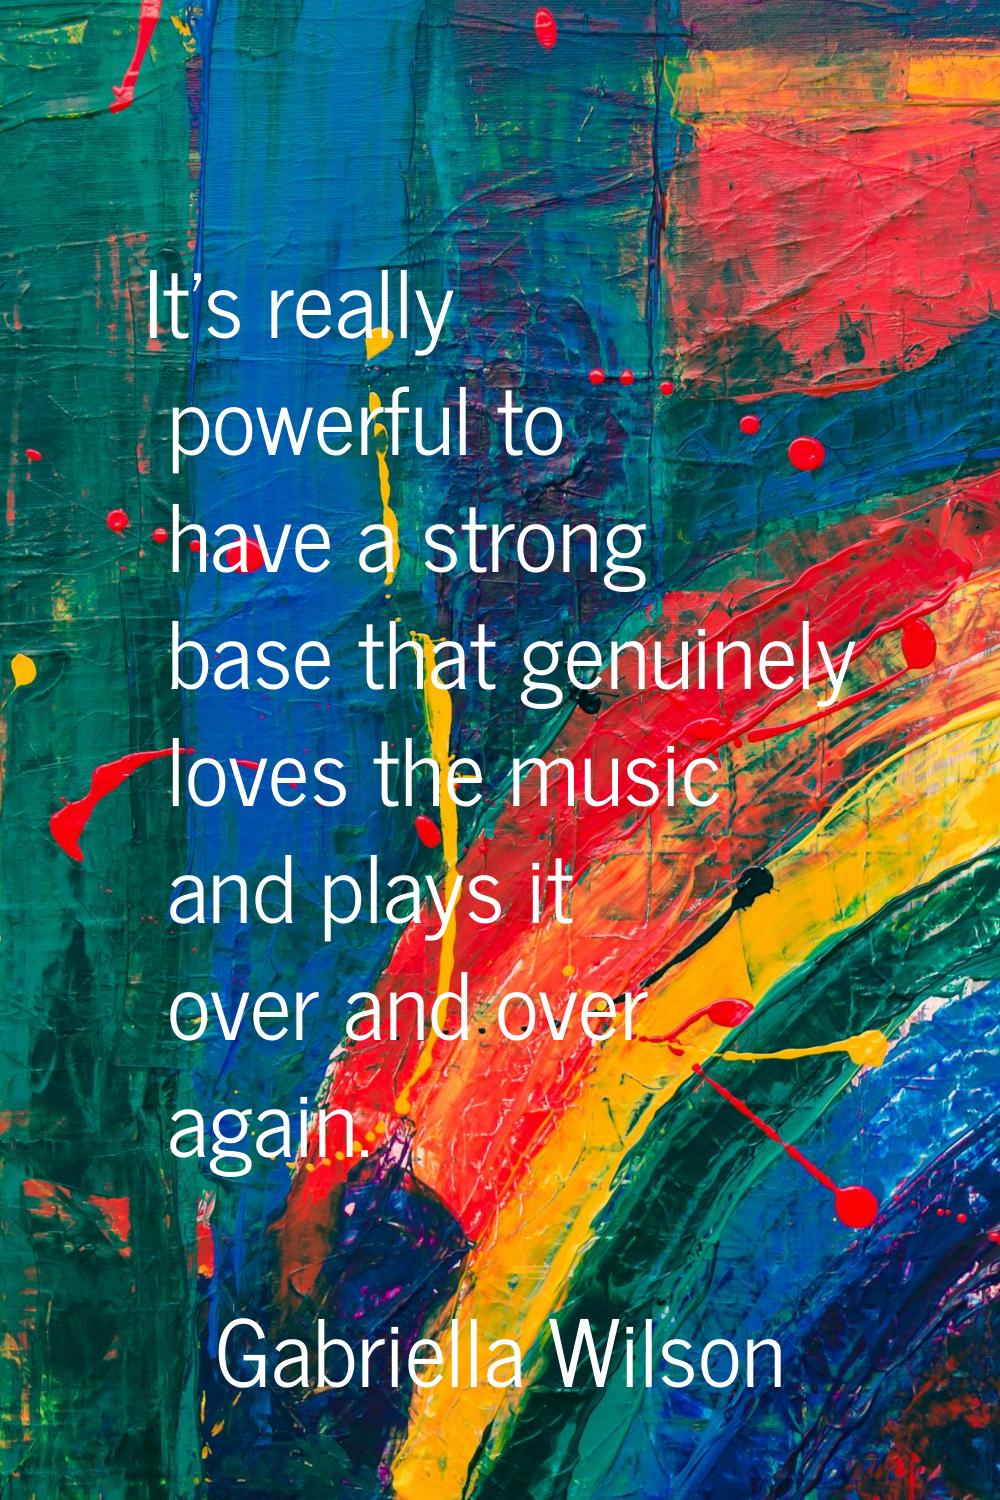 It's really powerful to have a strong base that genuinely loves the music and plays it over and ove